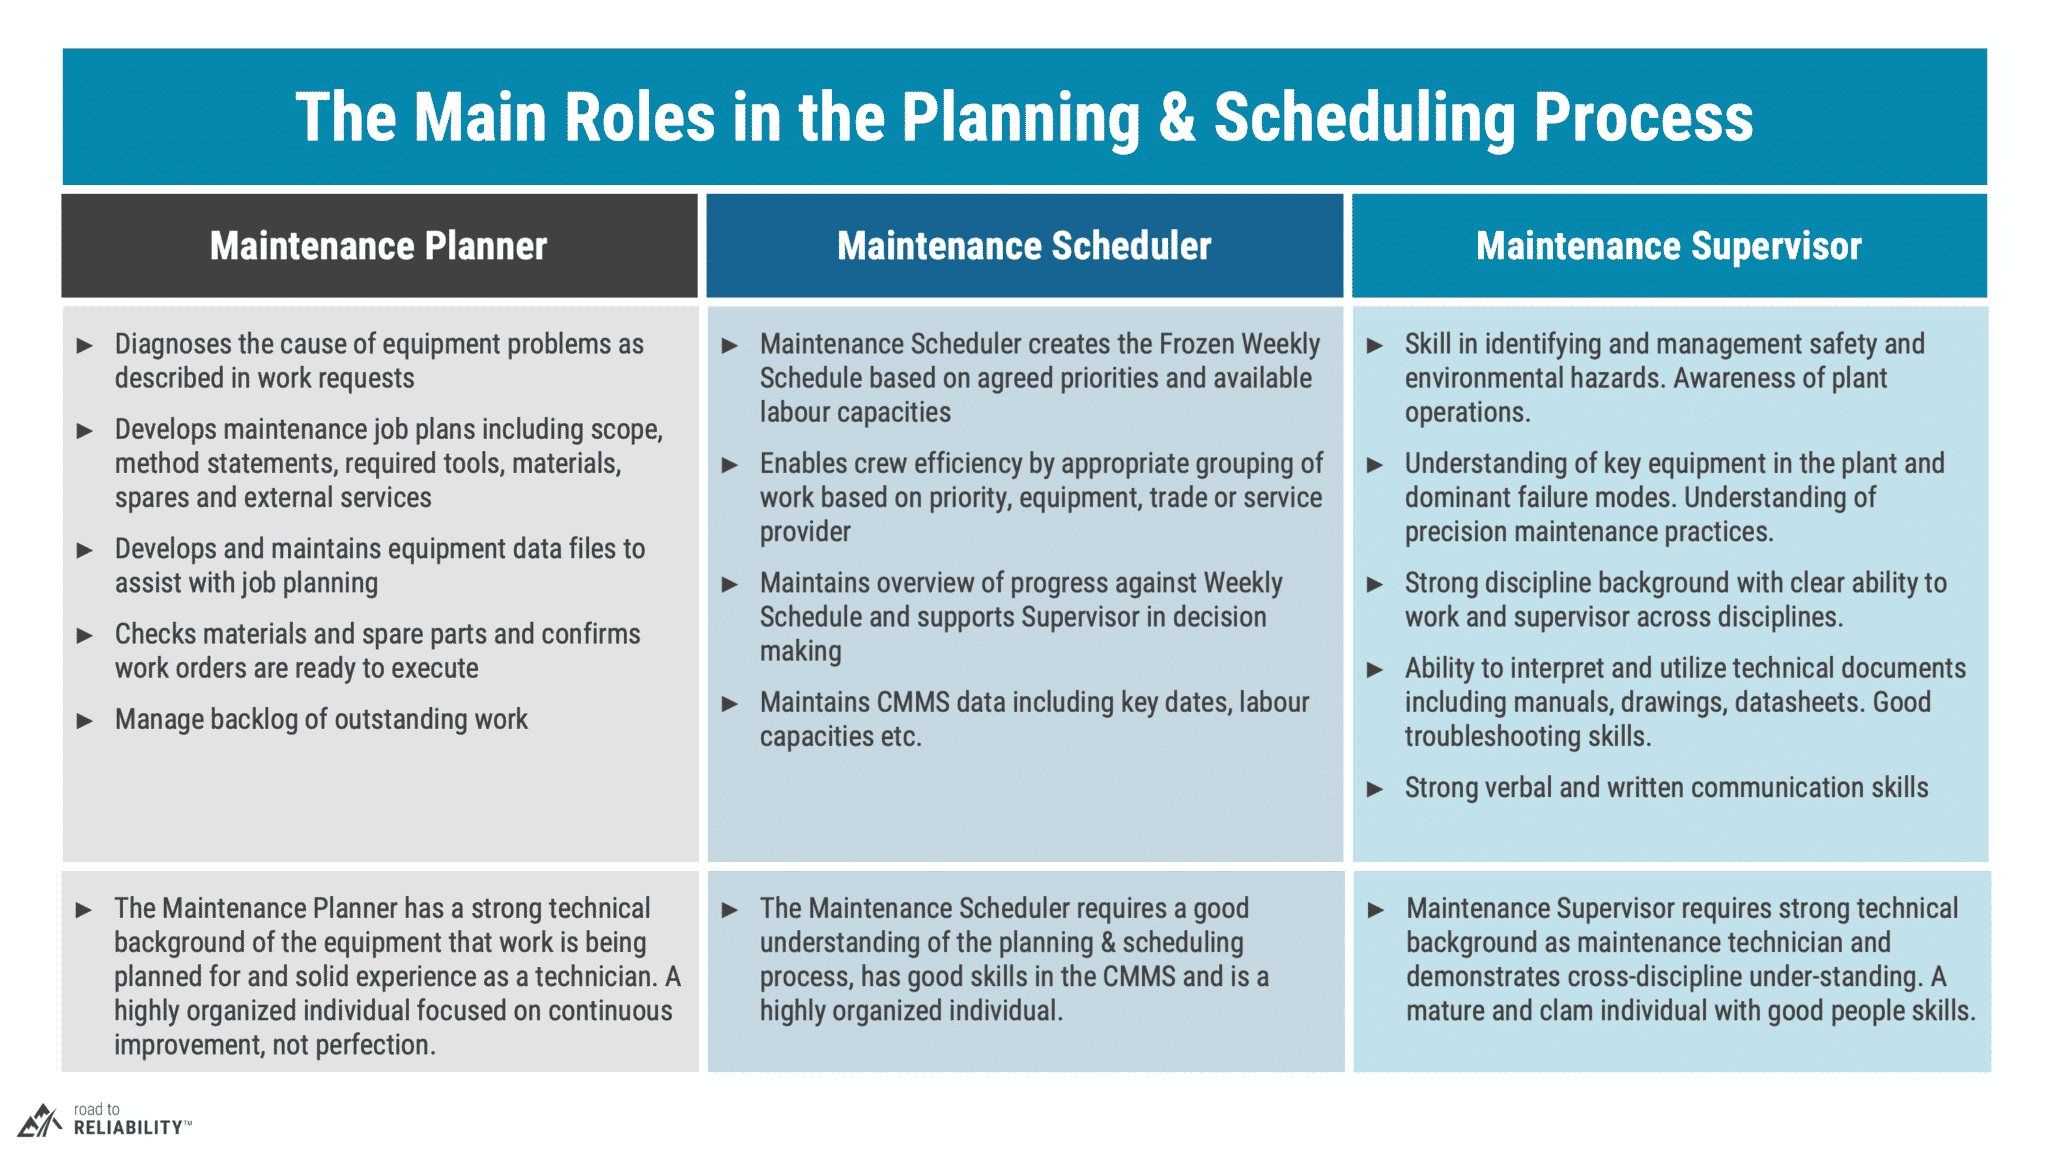 the key roles in planning & scheduling explained during the online course